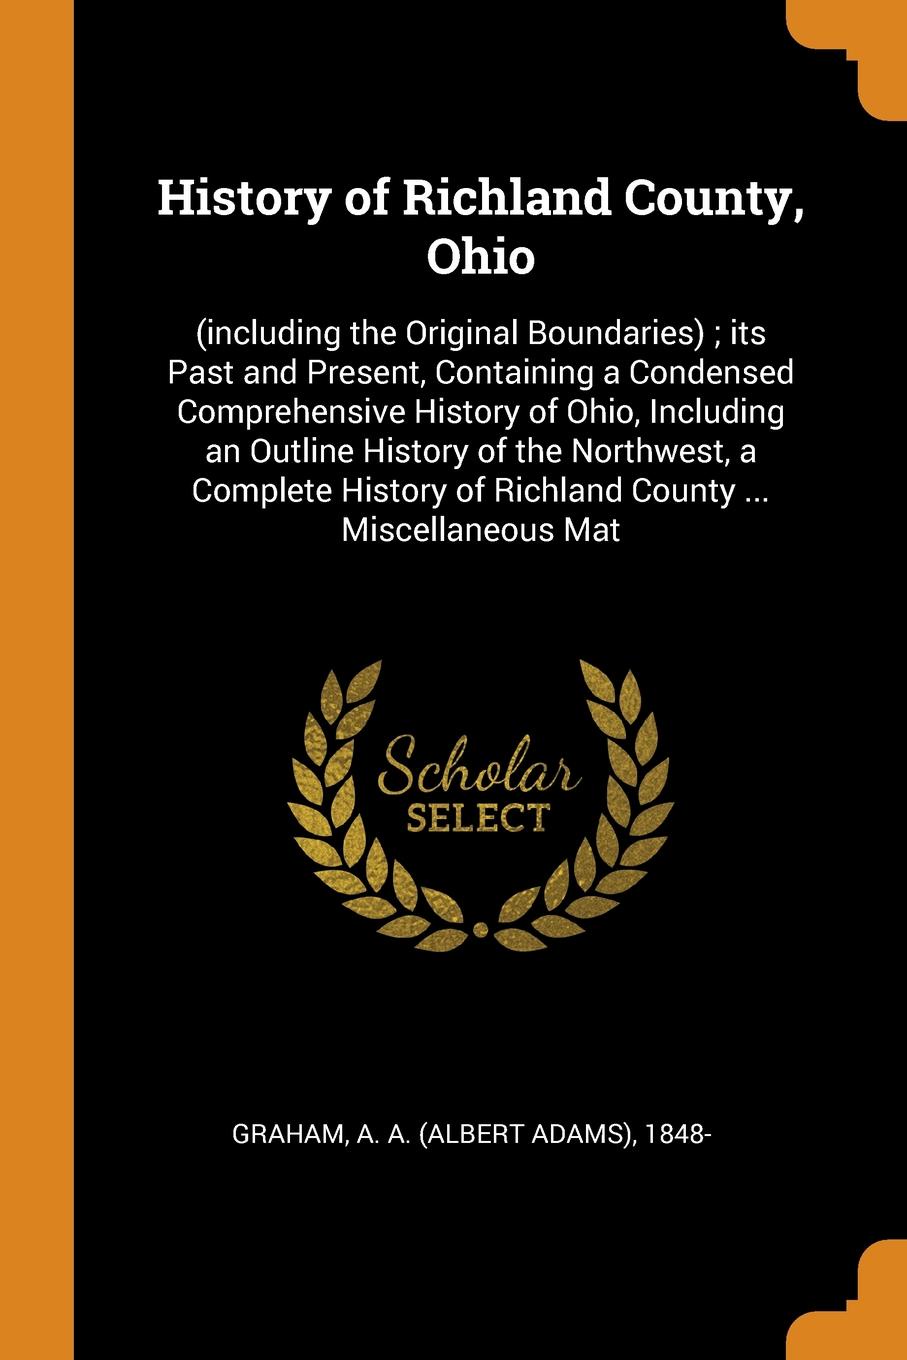 History of Richland County, Ohio. (including the Original Boundaries) ; its Past and Present, Containing a Condensed Comprehensive History of Ohio, Including an Outline History of the Northwest, a Complete History of Richland County ... Miscellane...